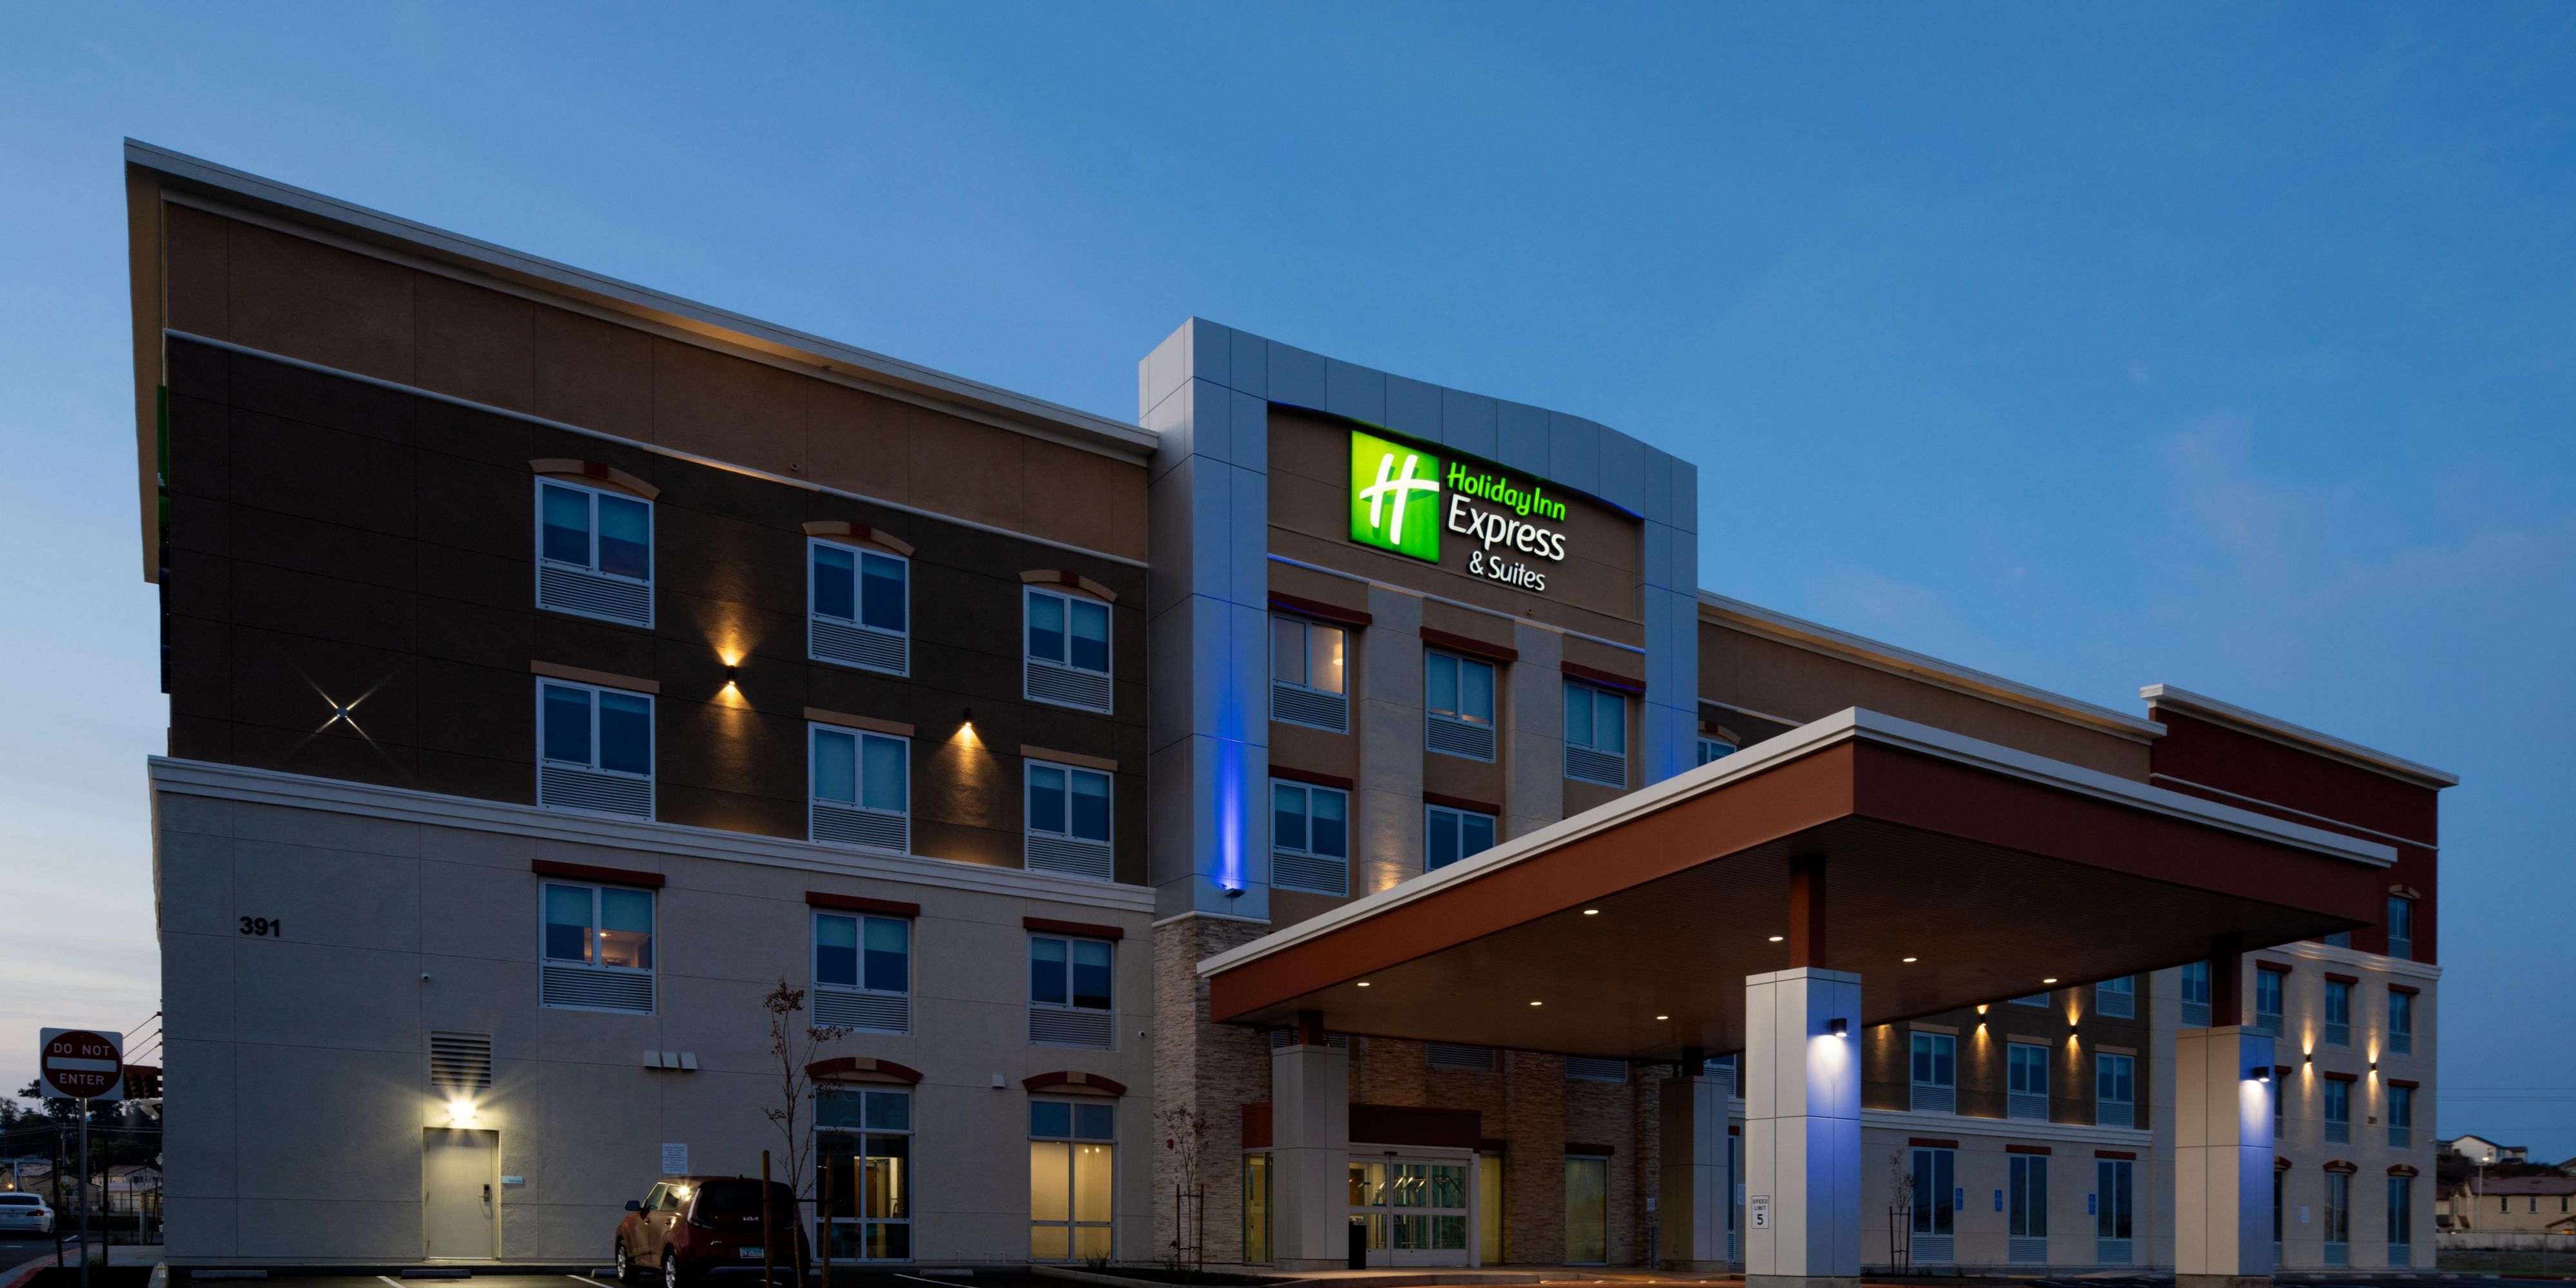 Holiday Inn Express & Suites Hollister - Hollister, United States